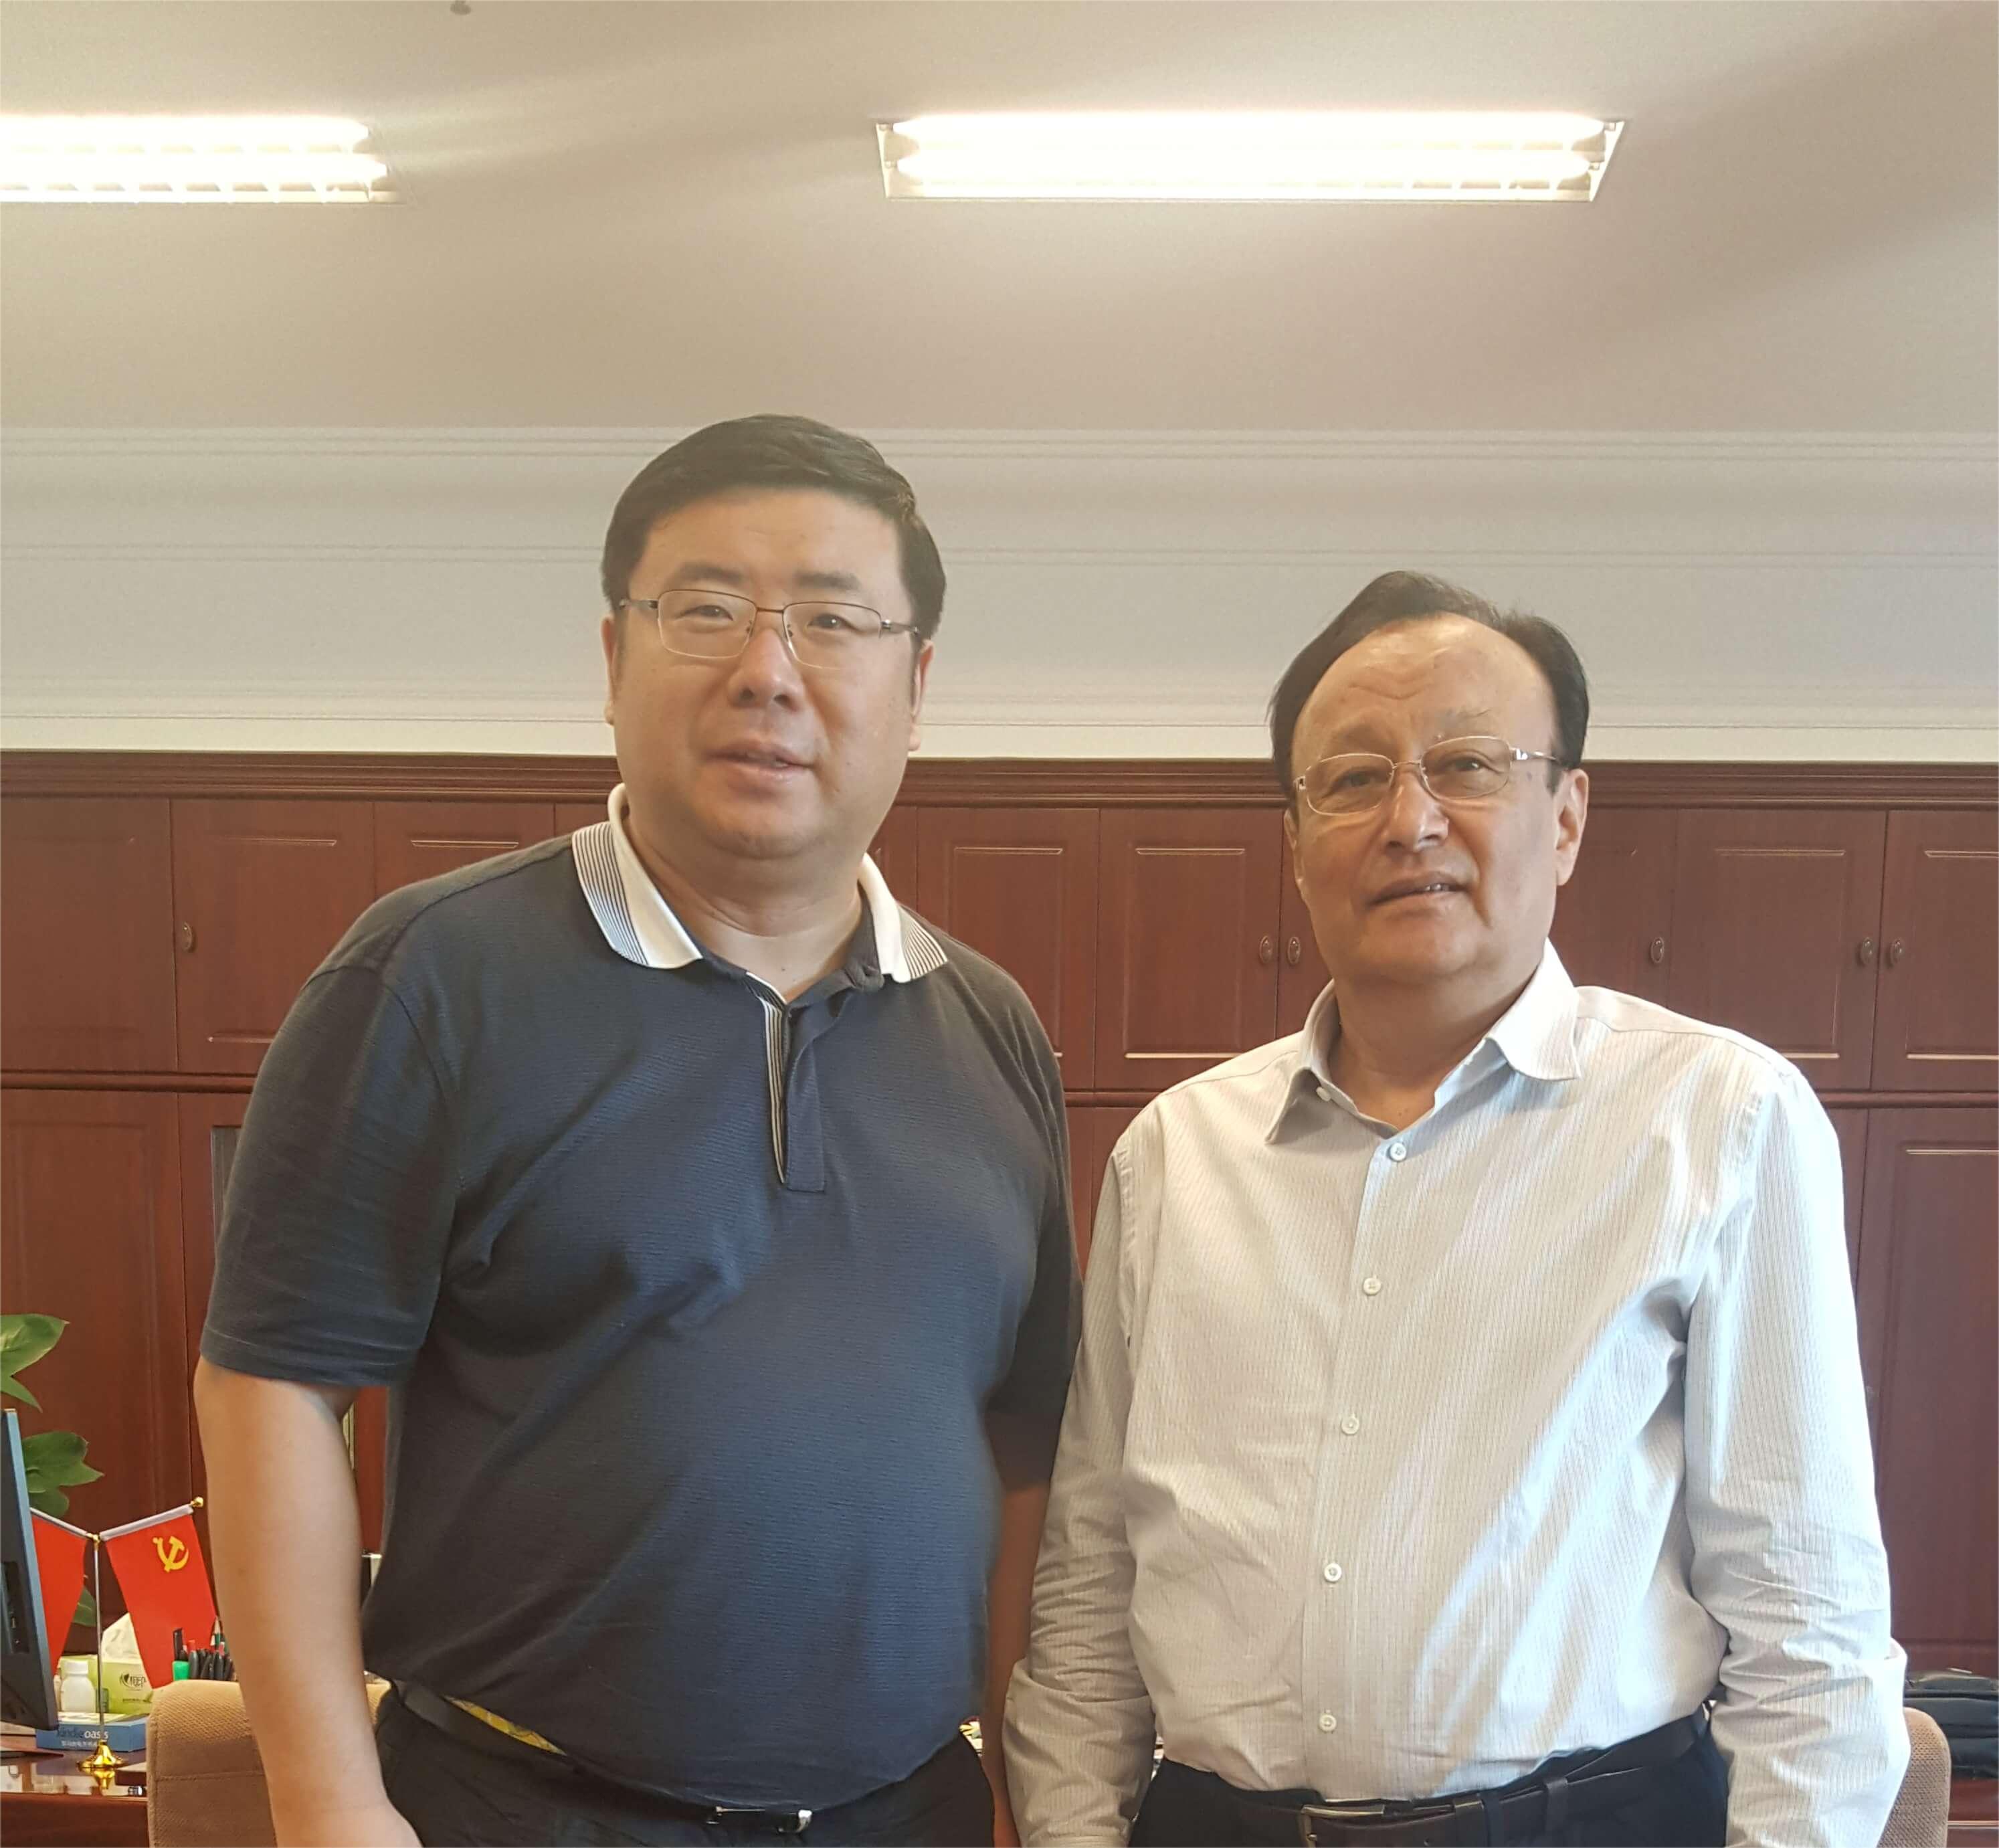 Chairman Li Yong and Xue Ke, the Current Deputy Director of the National Committee of the National People’s Congress and Former Chairman of the Government of the Xinjiang Uygur Autonomous Region, have